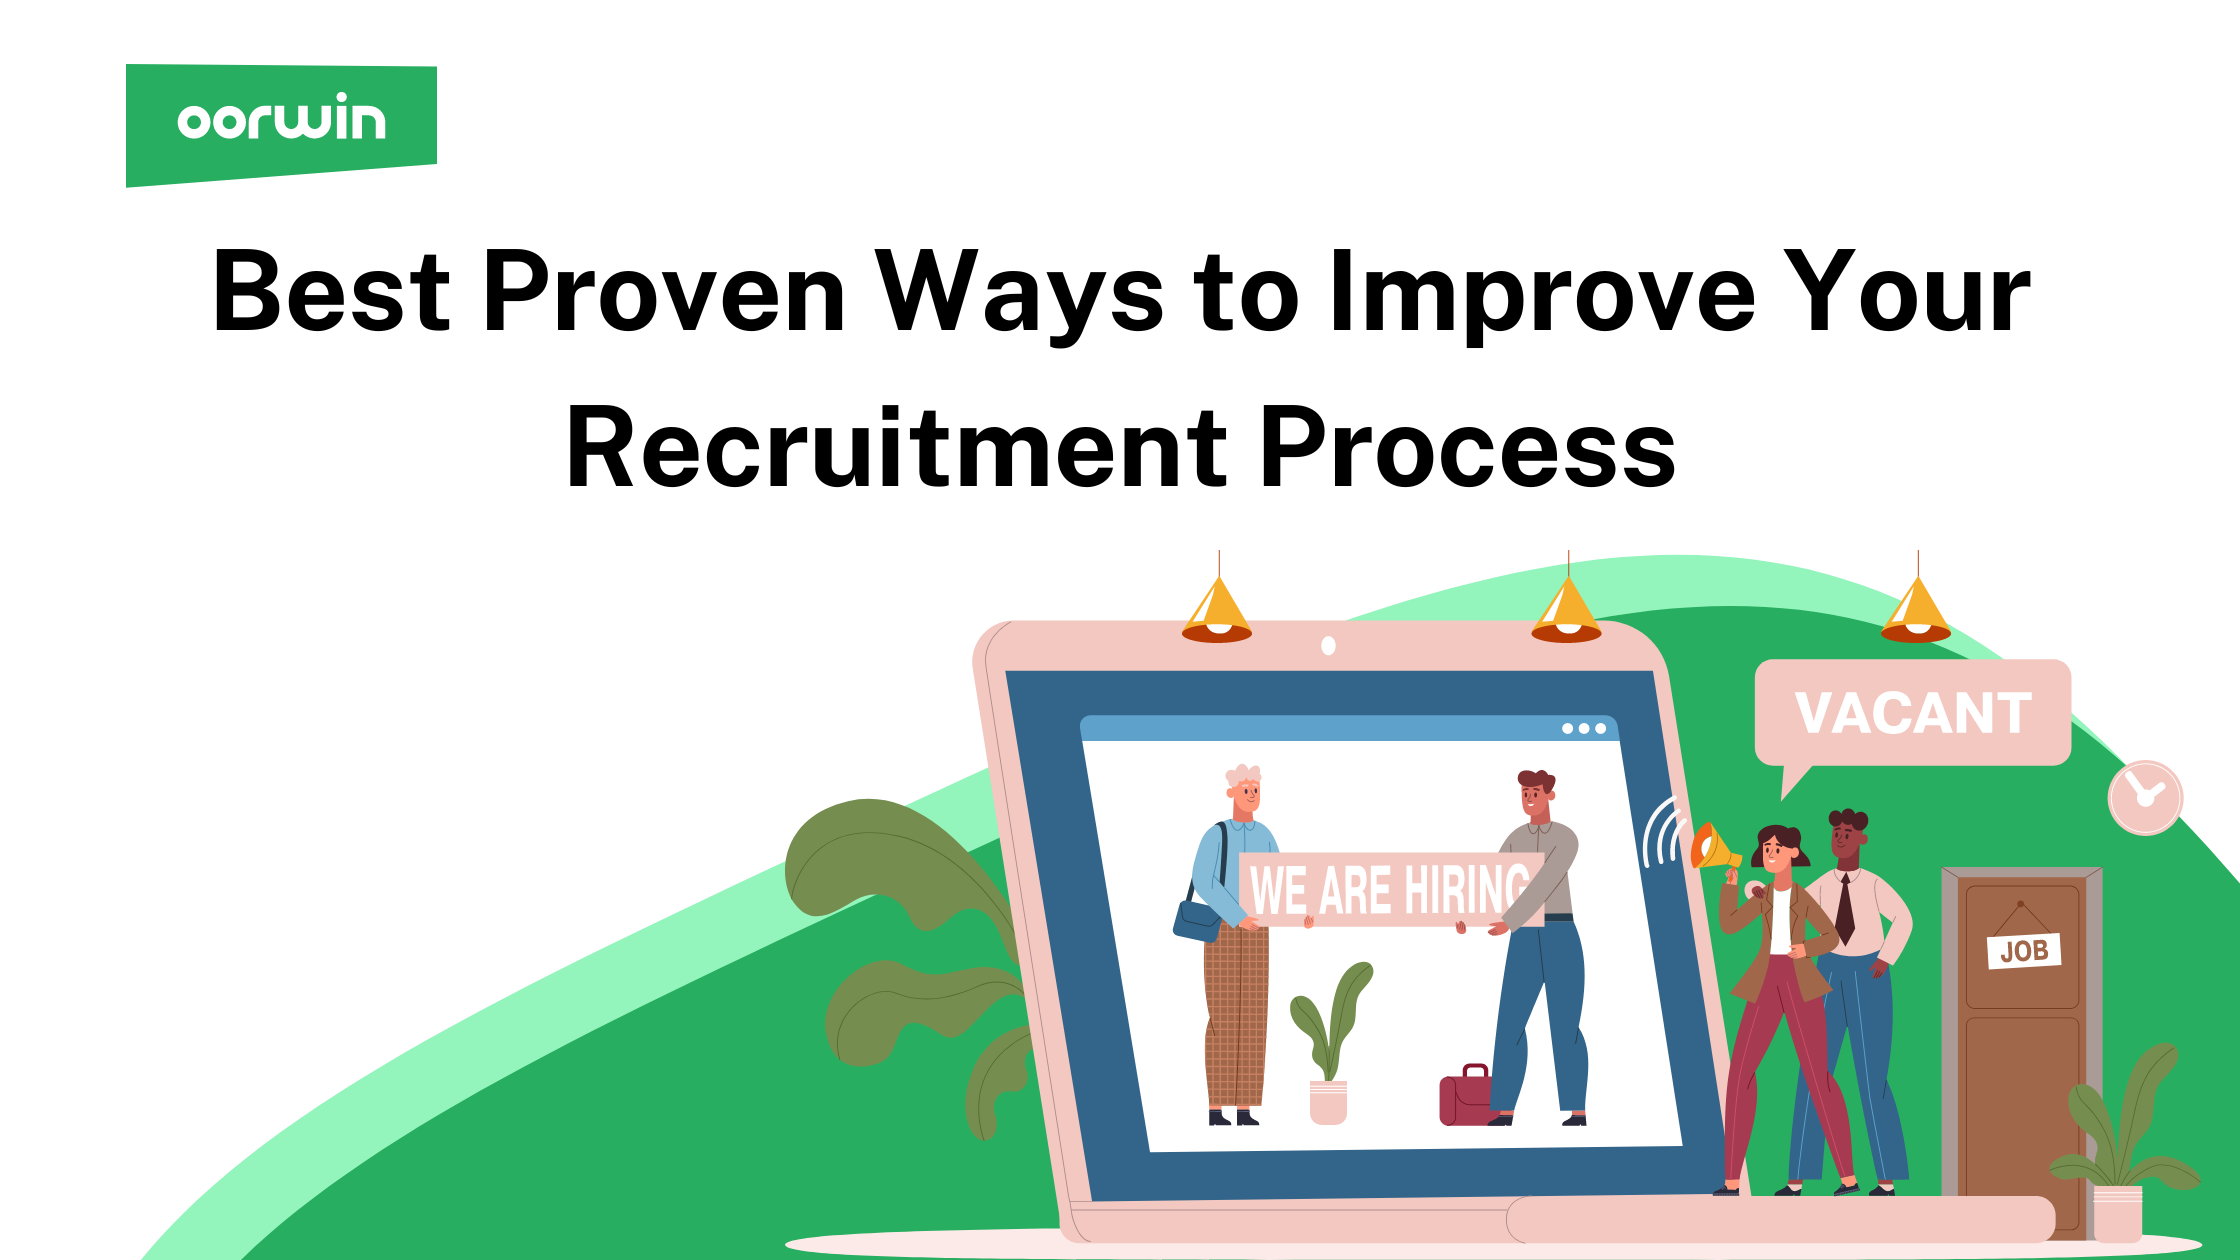 Best Proven Ways to Improve Your Recruitment Process